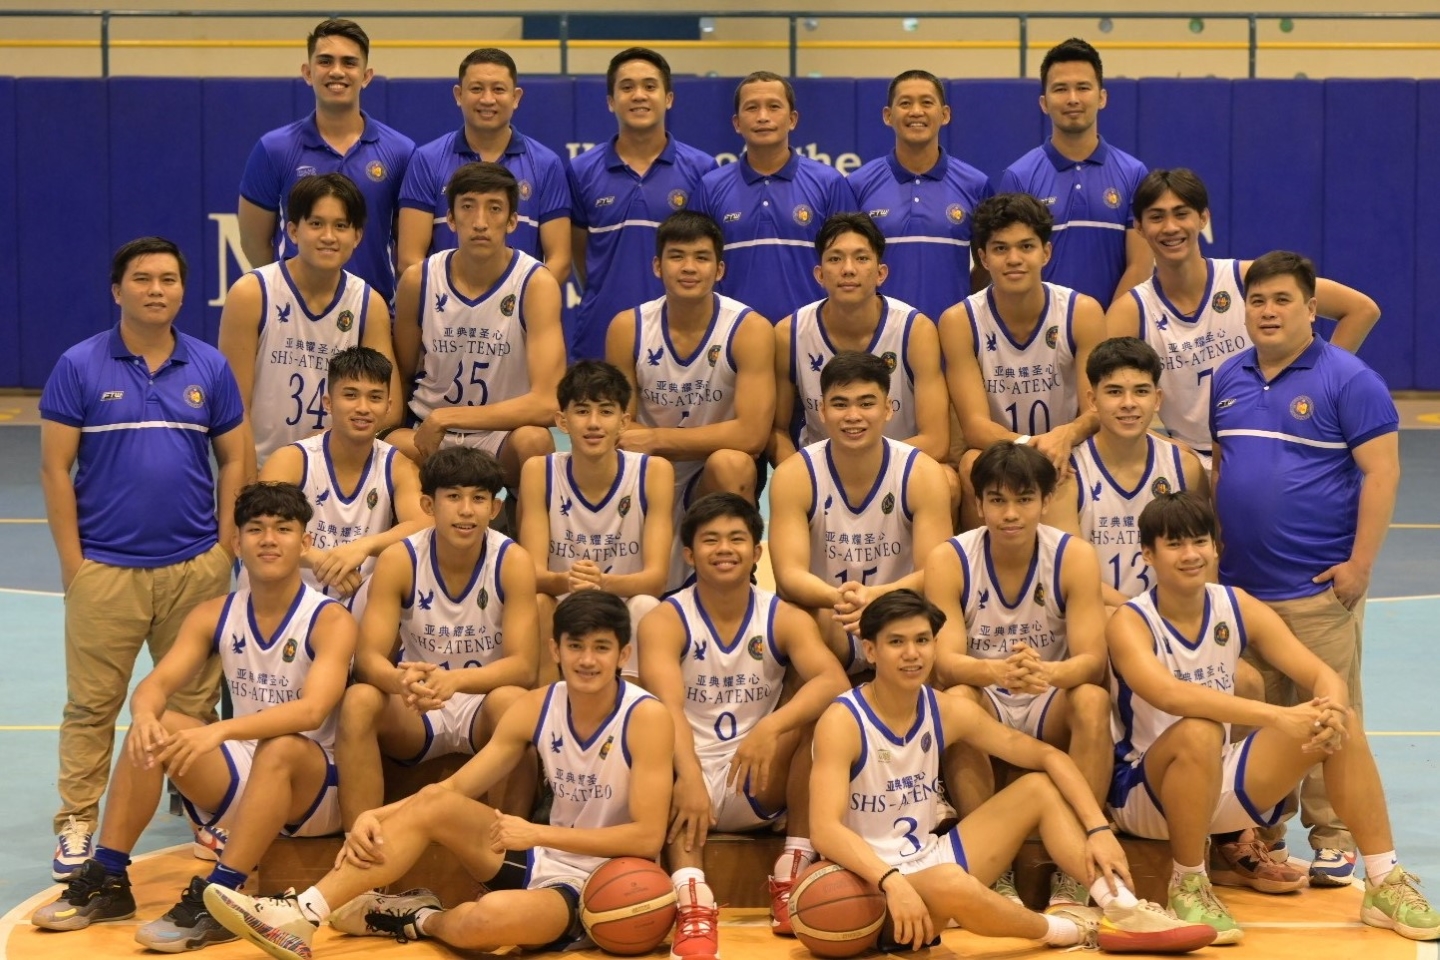 SHS-Ateneo, with Gilas Pilipinas Youth standout Jared Bahay. –CONTRIBUTED PHOTO